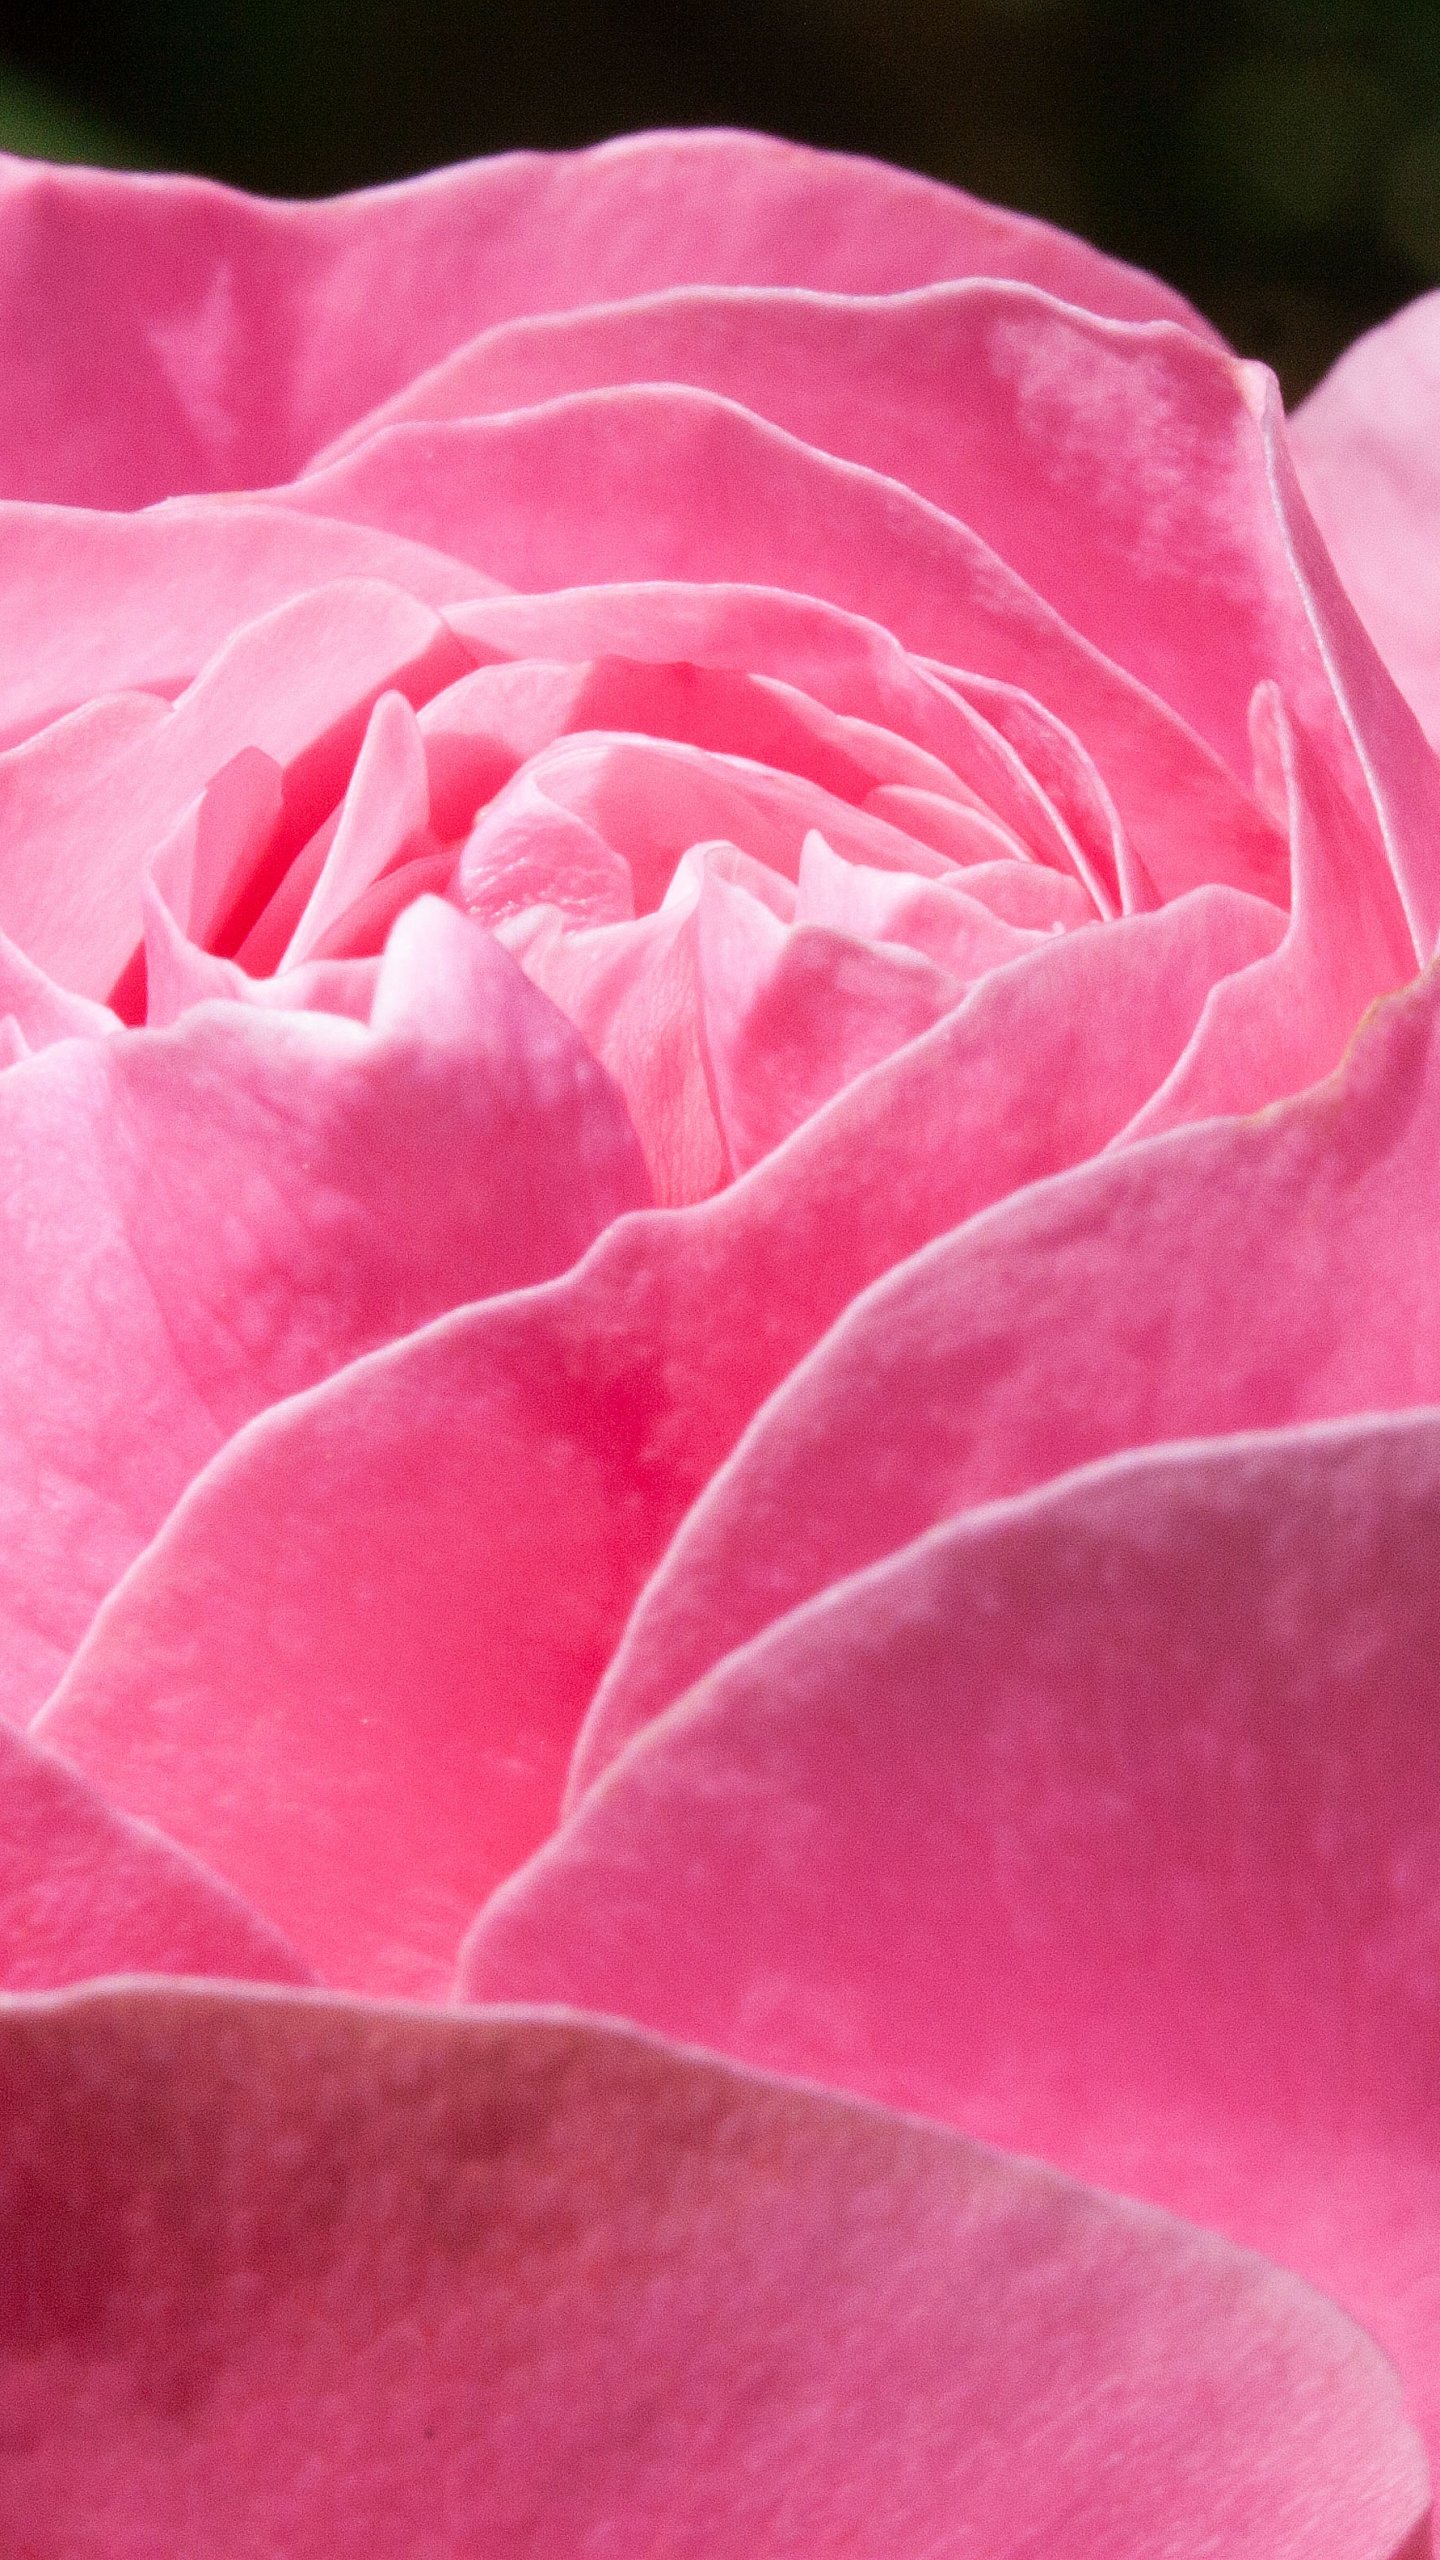 Pink Rose Wallpaper For Mobile : flowers, pink roses, wallpaper and